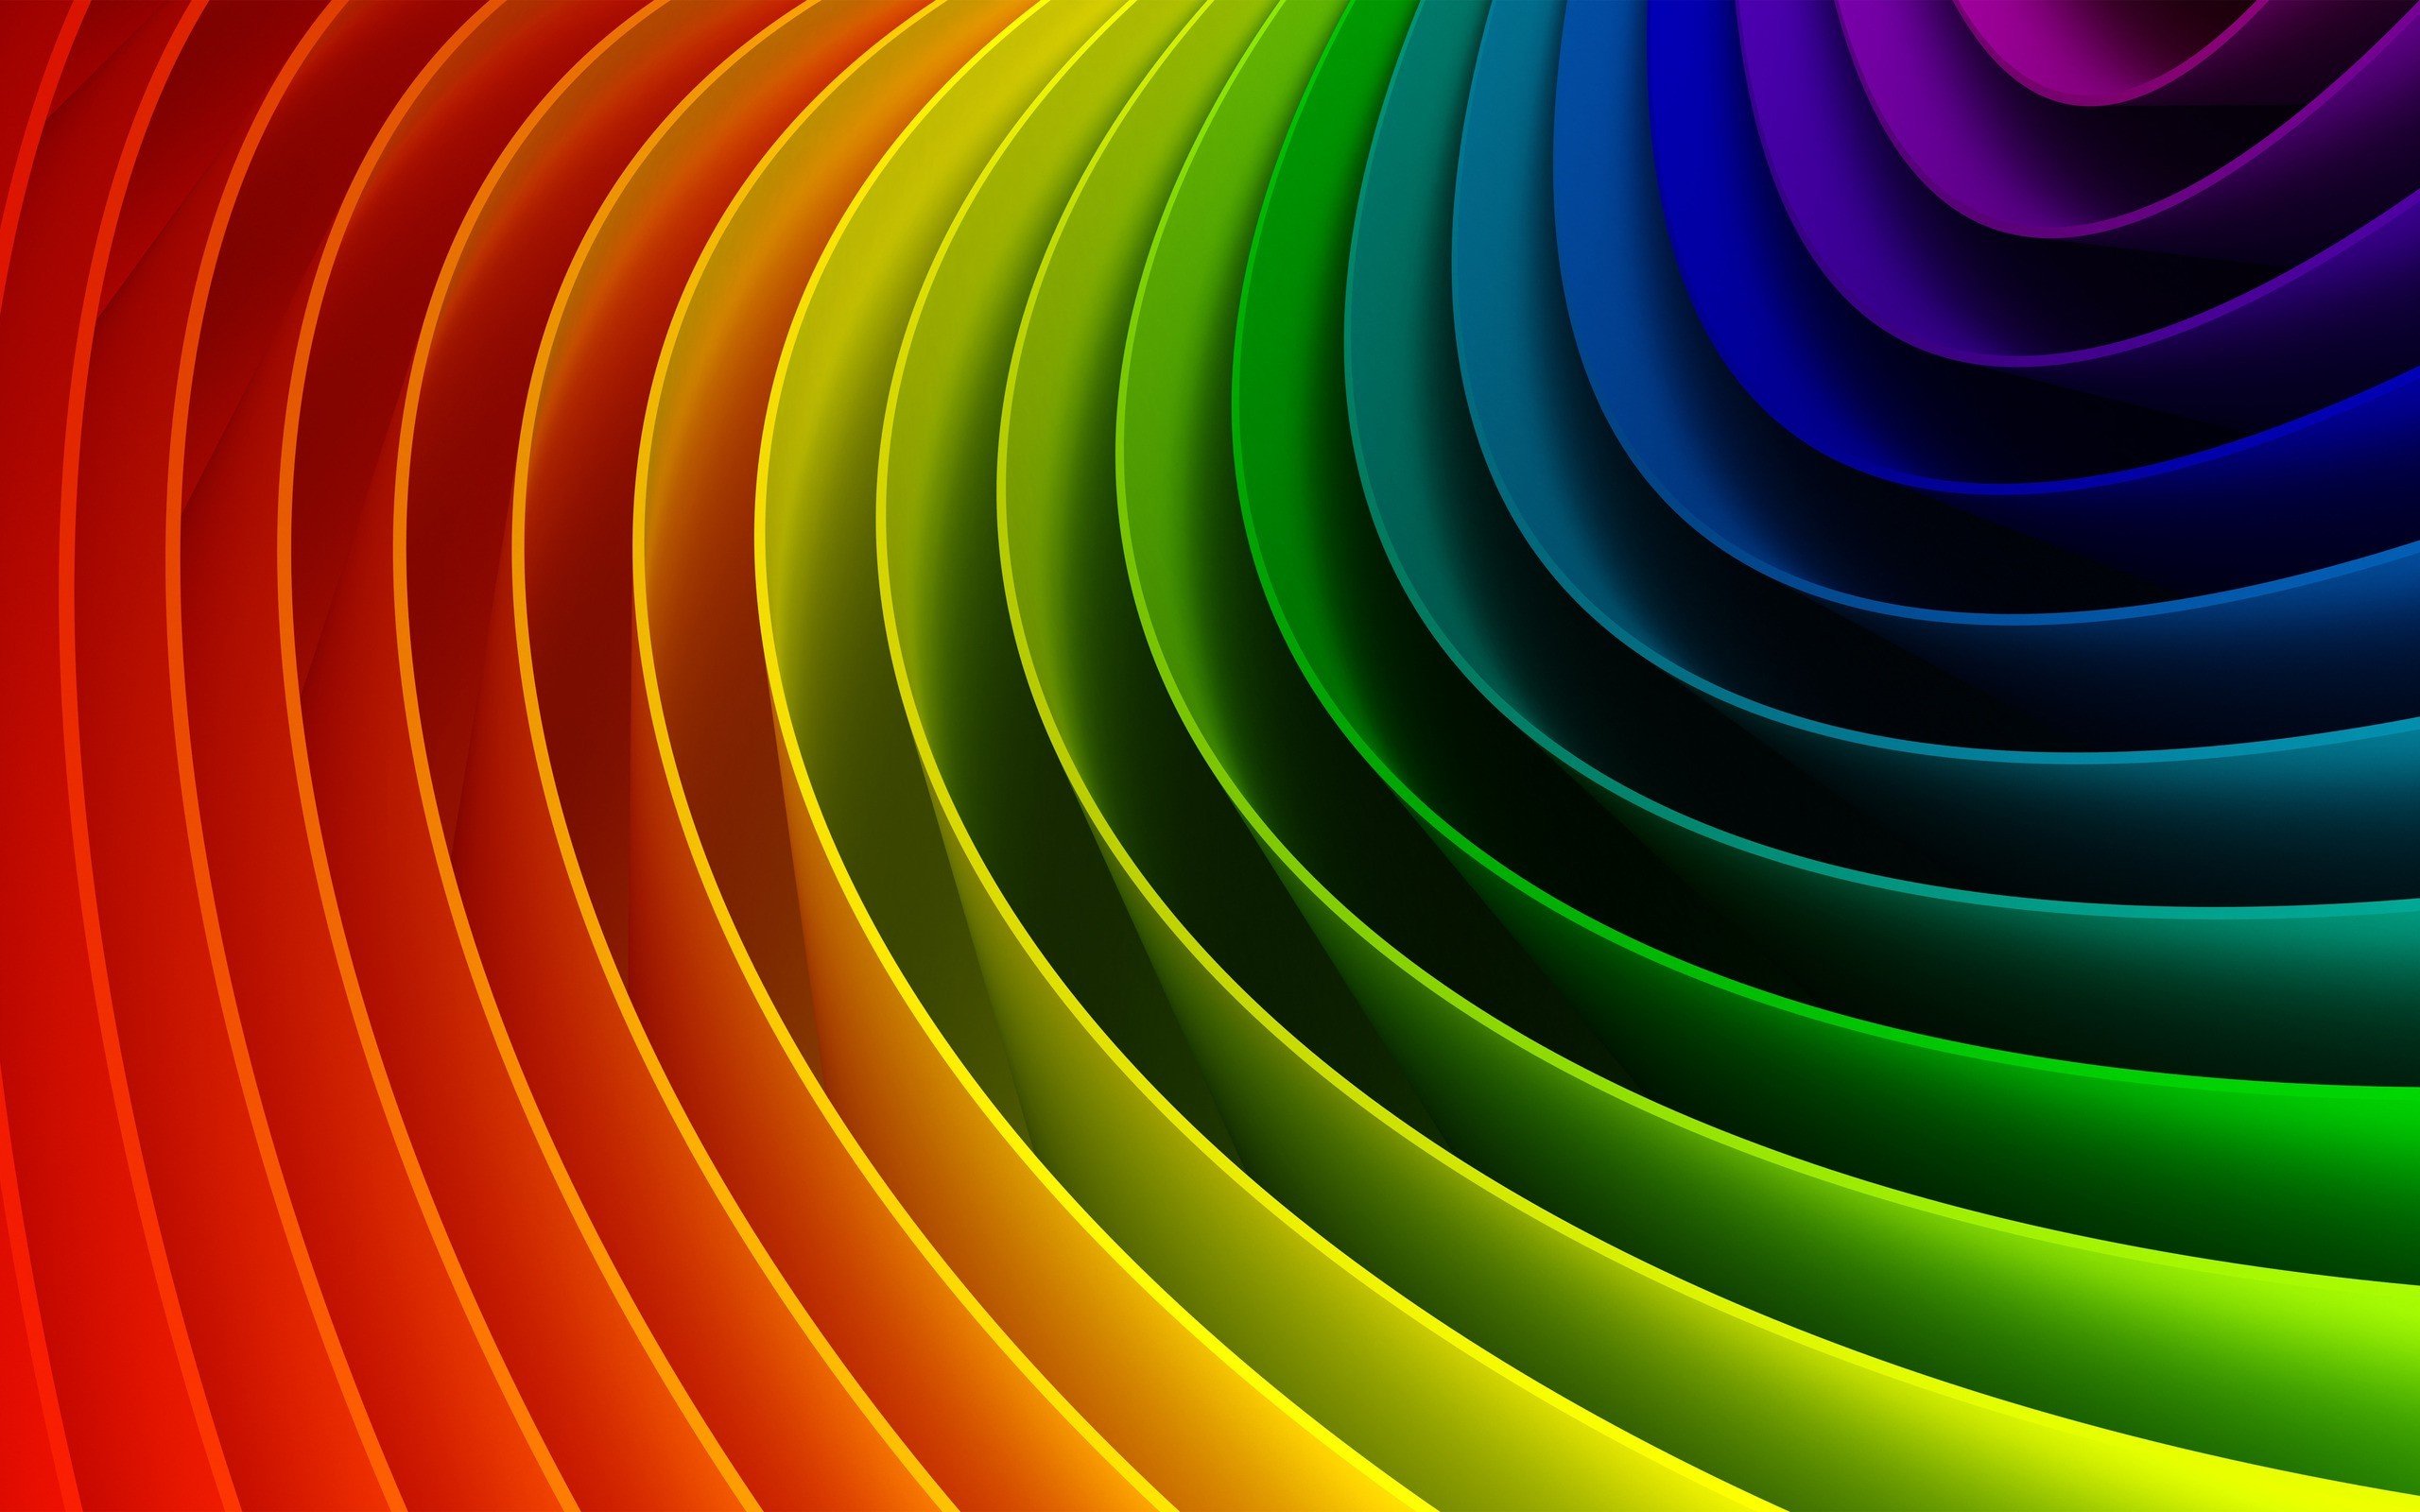 Colorful Rainbow wallpaper Colorful Rainbow hd wallpaper background